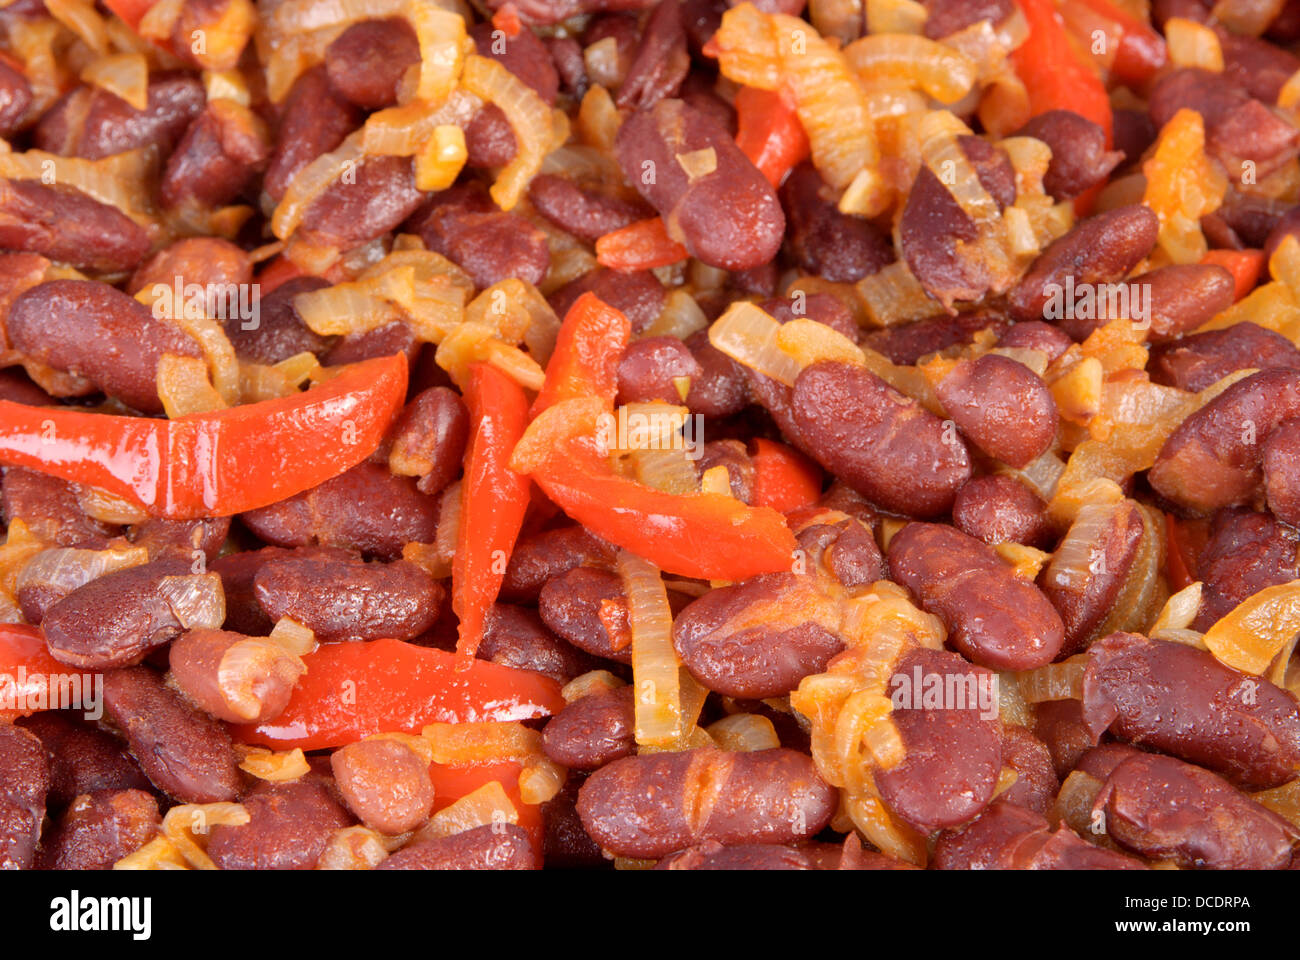 Cooked Chili ready to eat Stock Photo